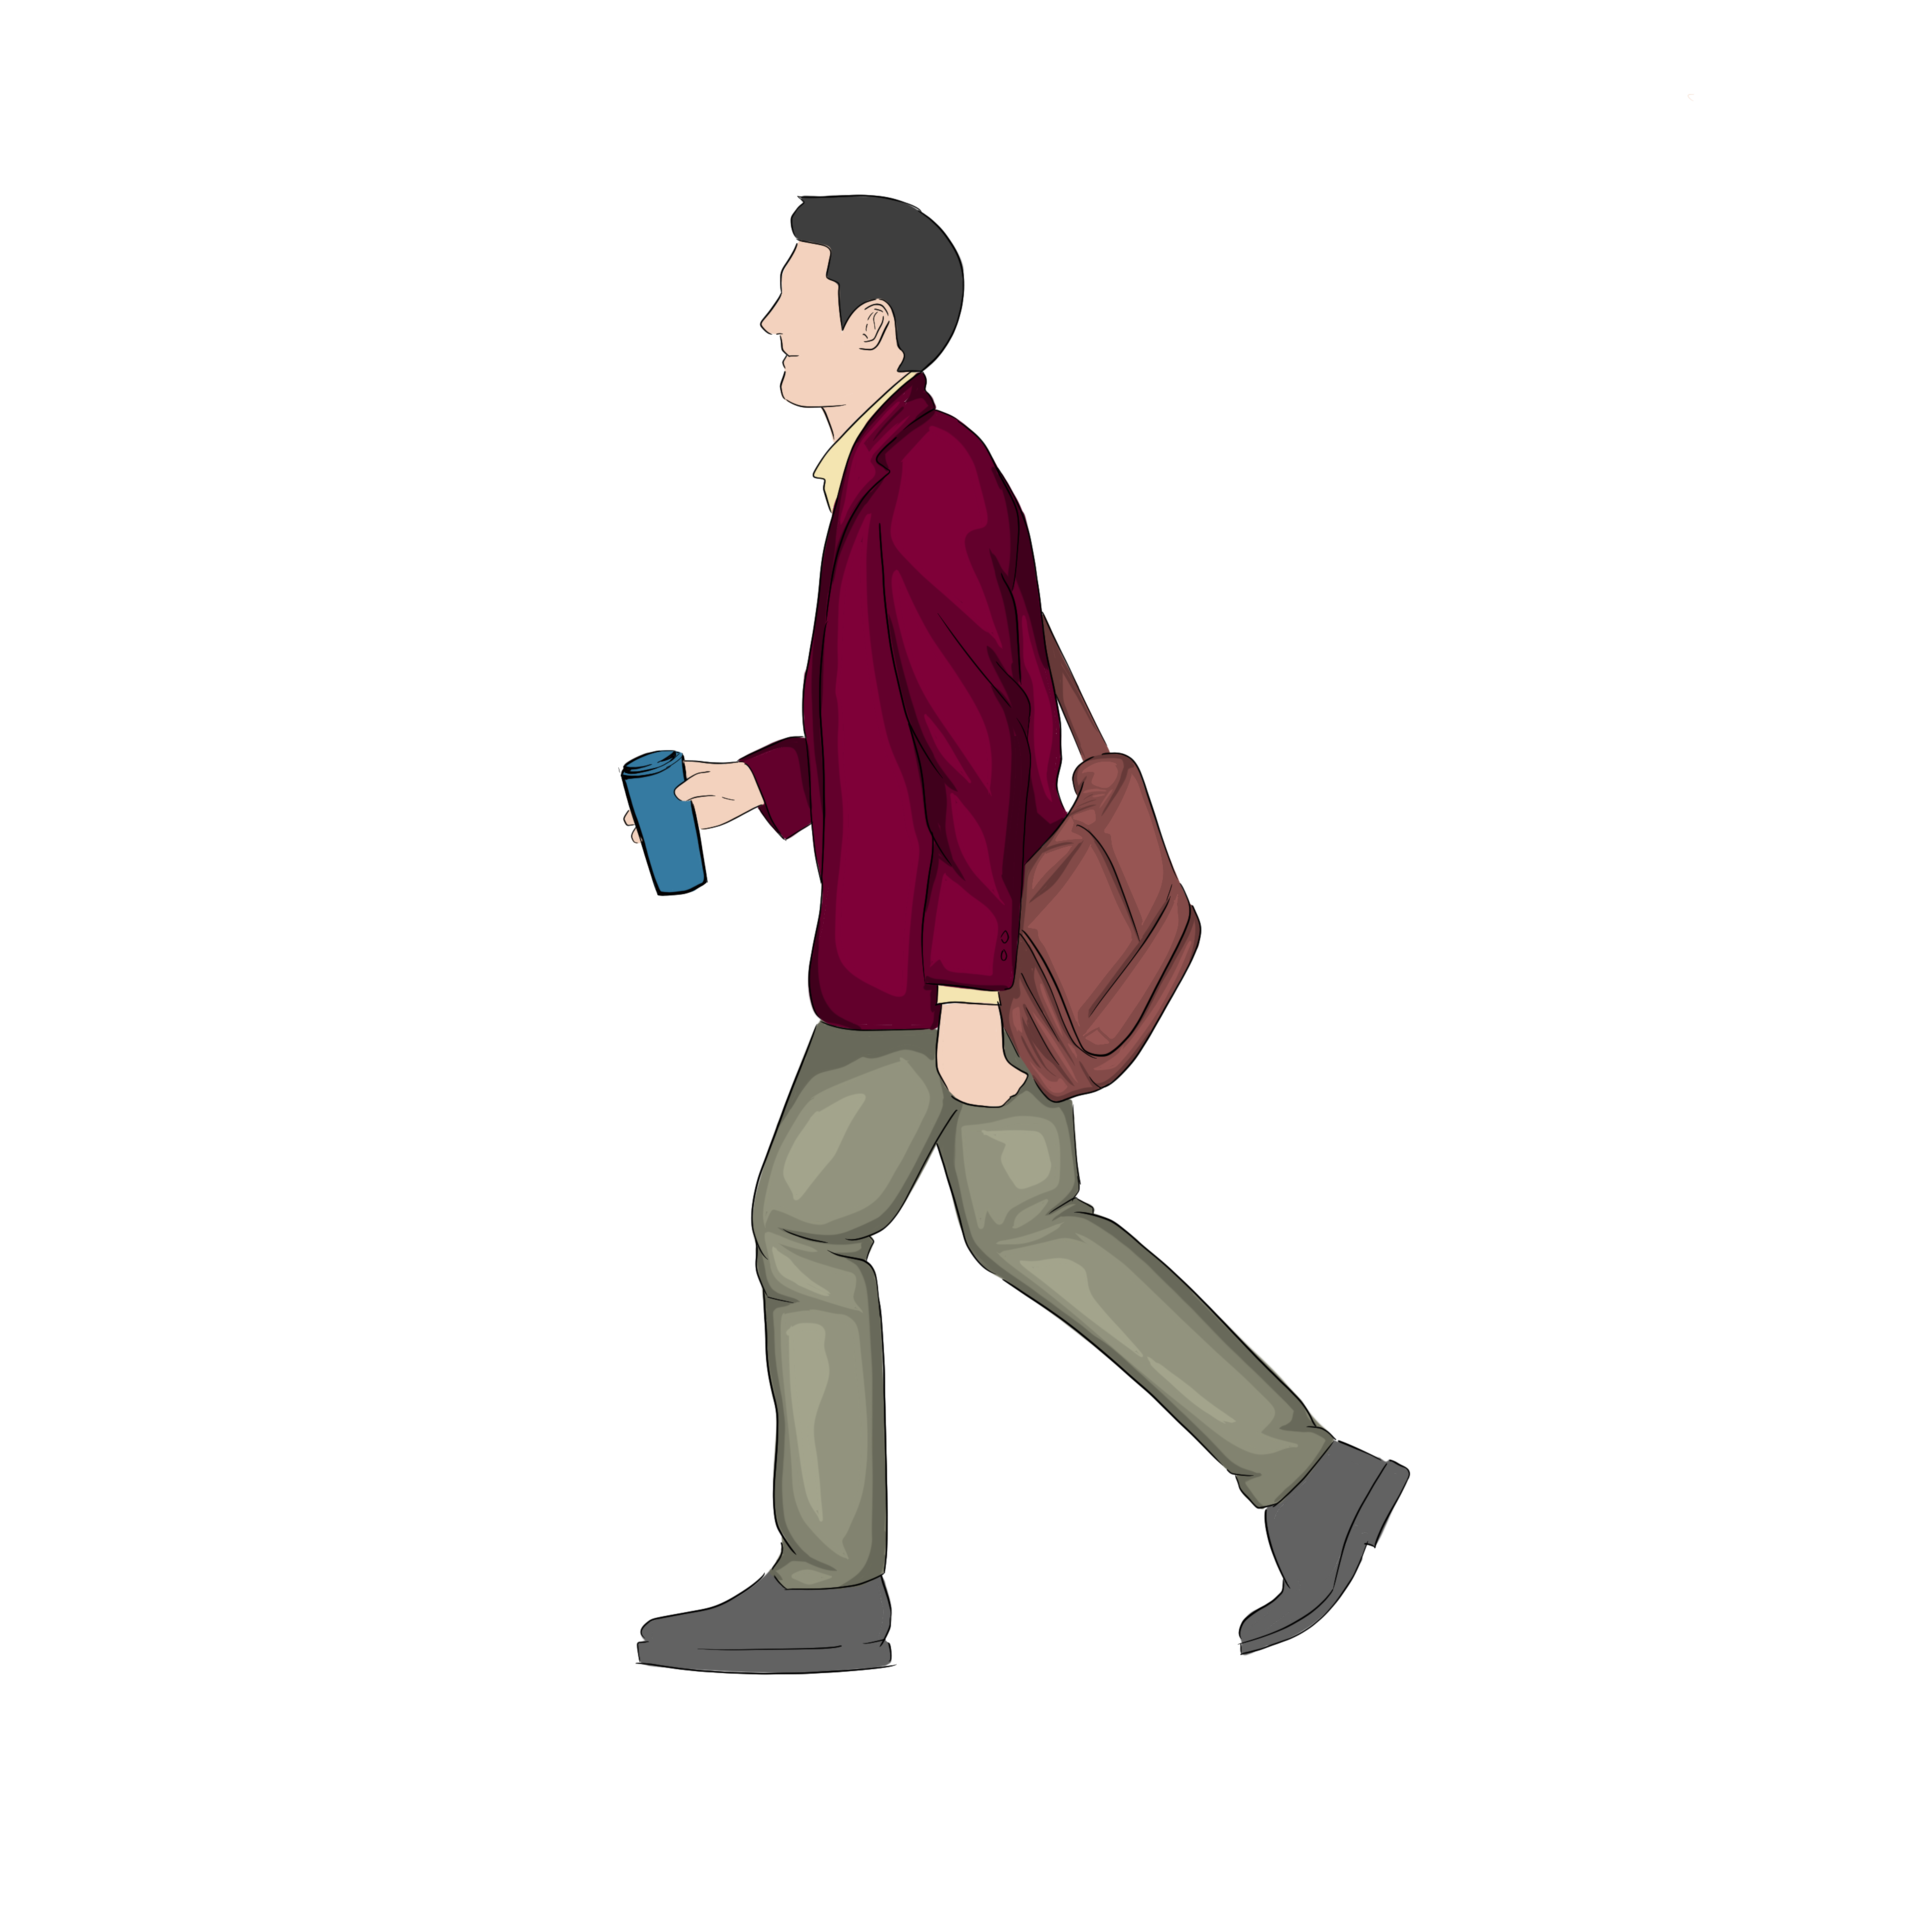 https://static.vecteezy.com/system/resources/previews/011/191/549/original/office-worker-walking-element-graphic-design-free-png.png